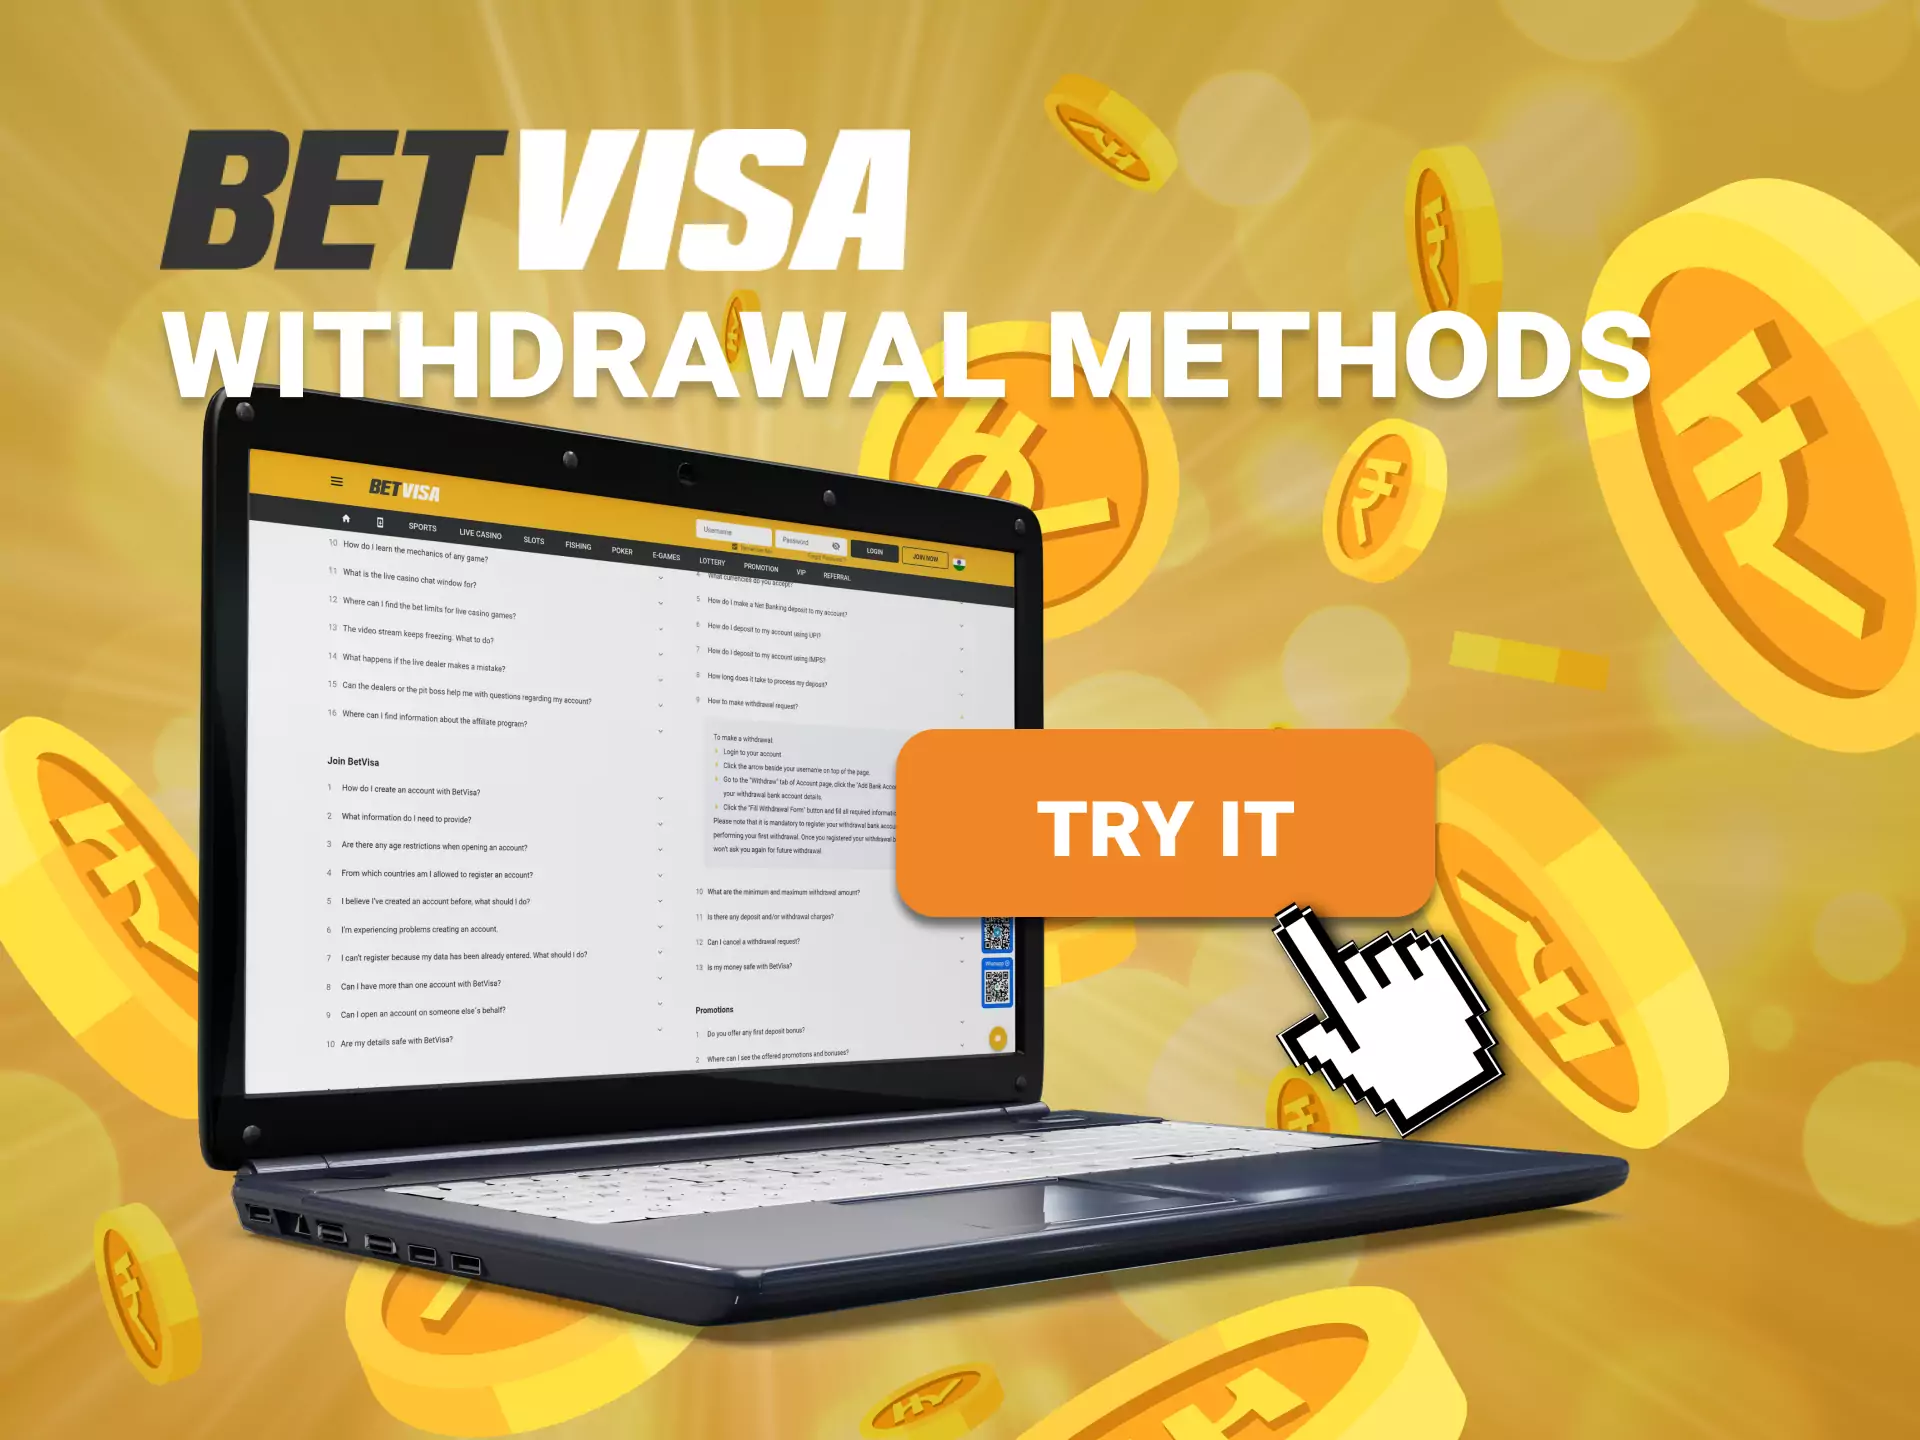 After you win, withdraw money from the Betvisa account by any suitable payment method.